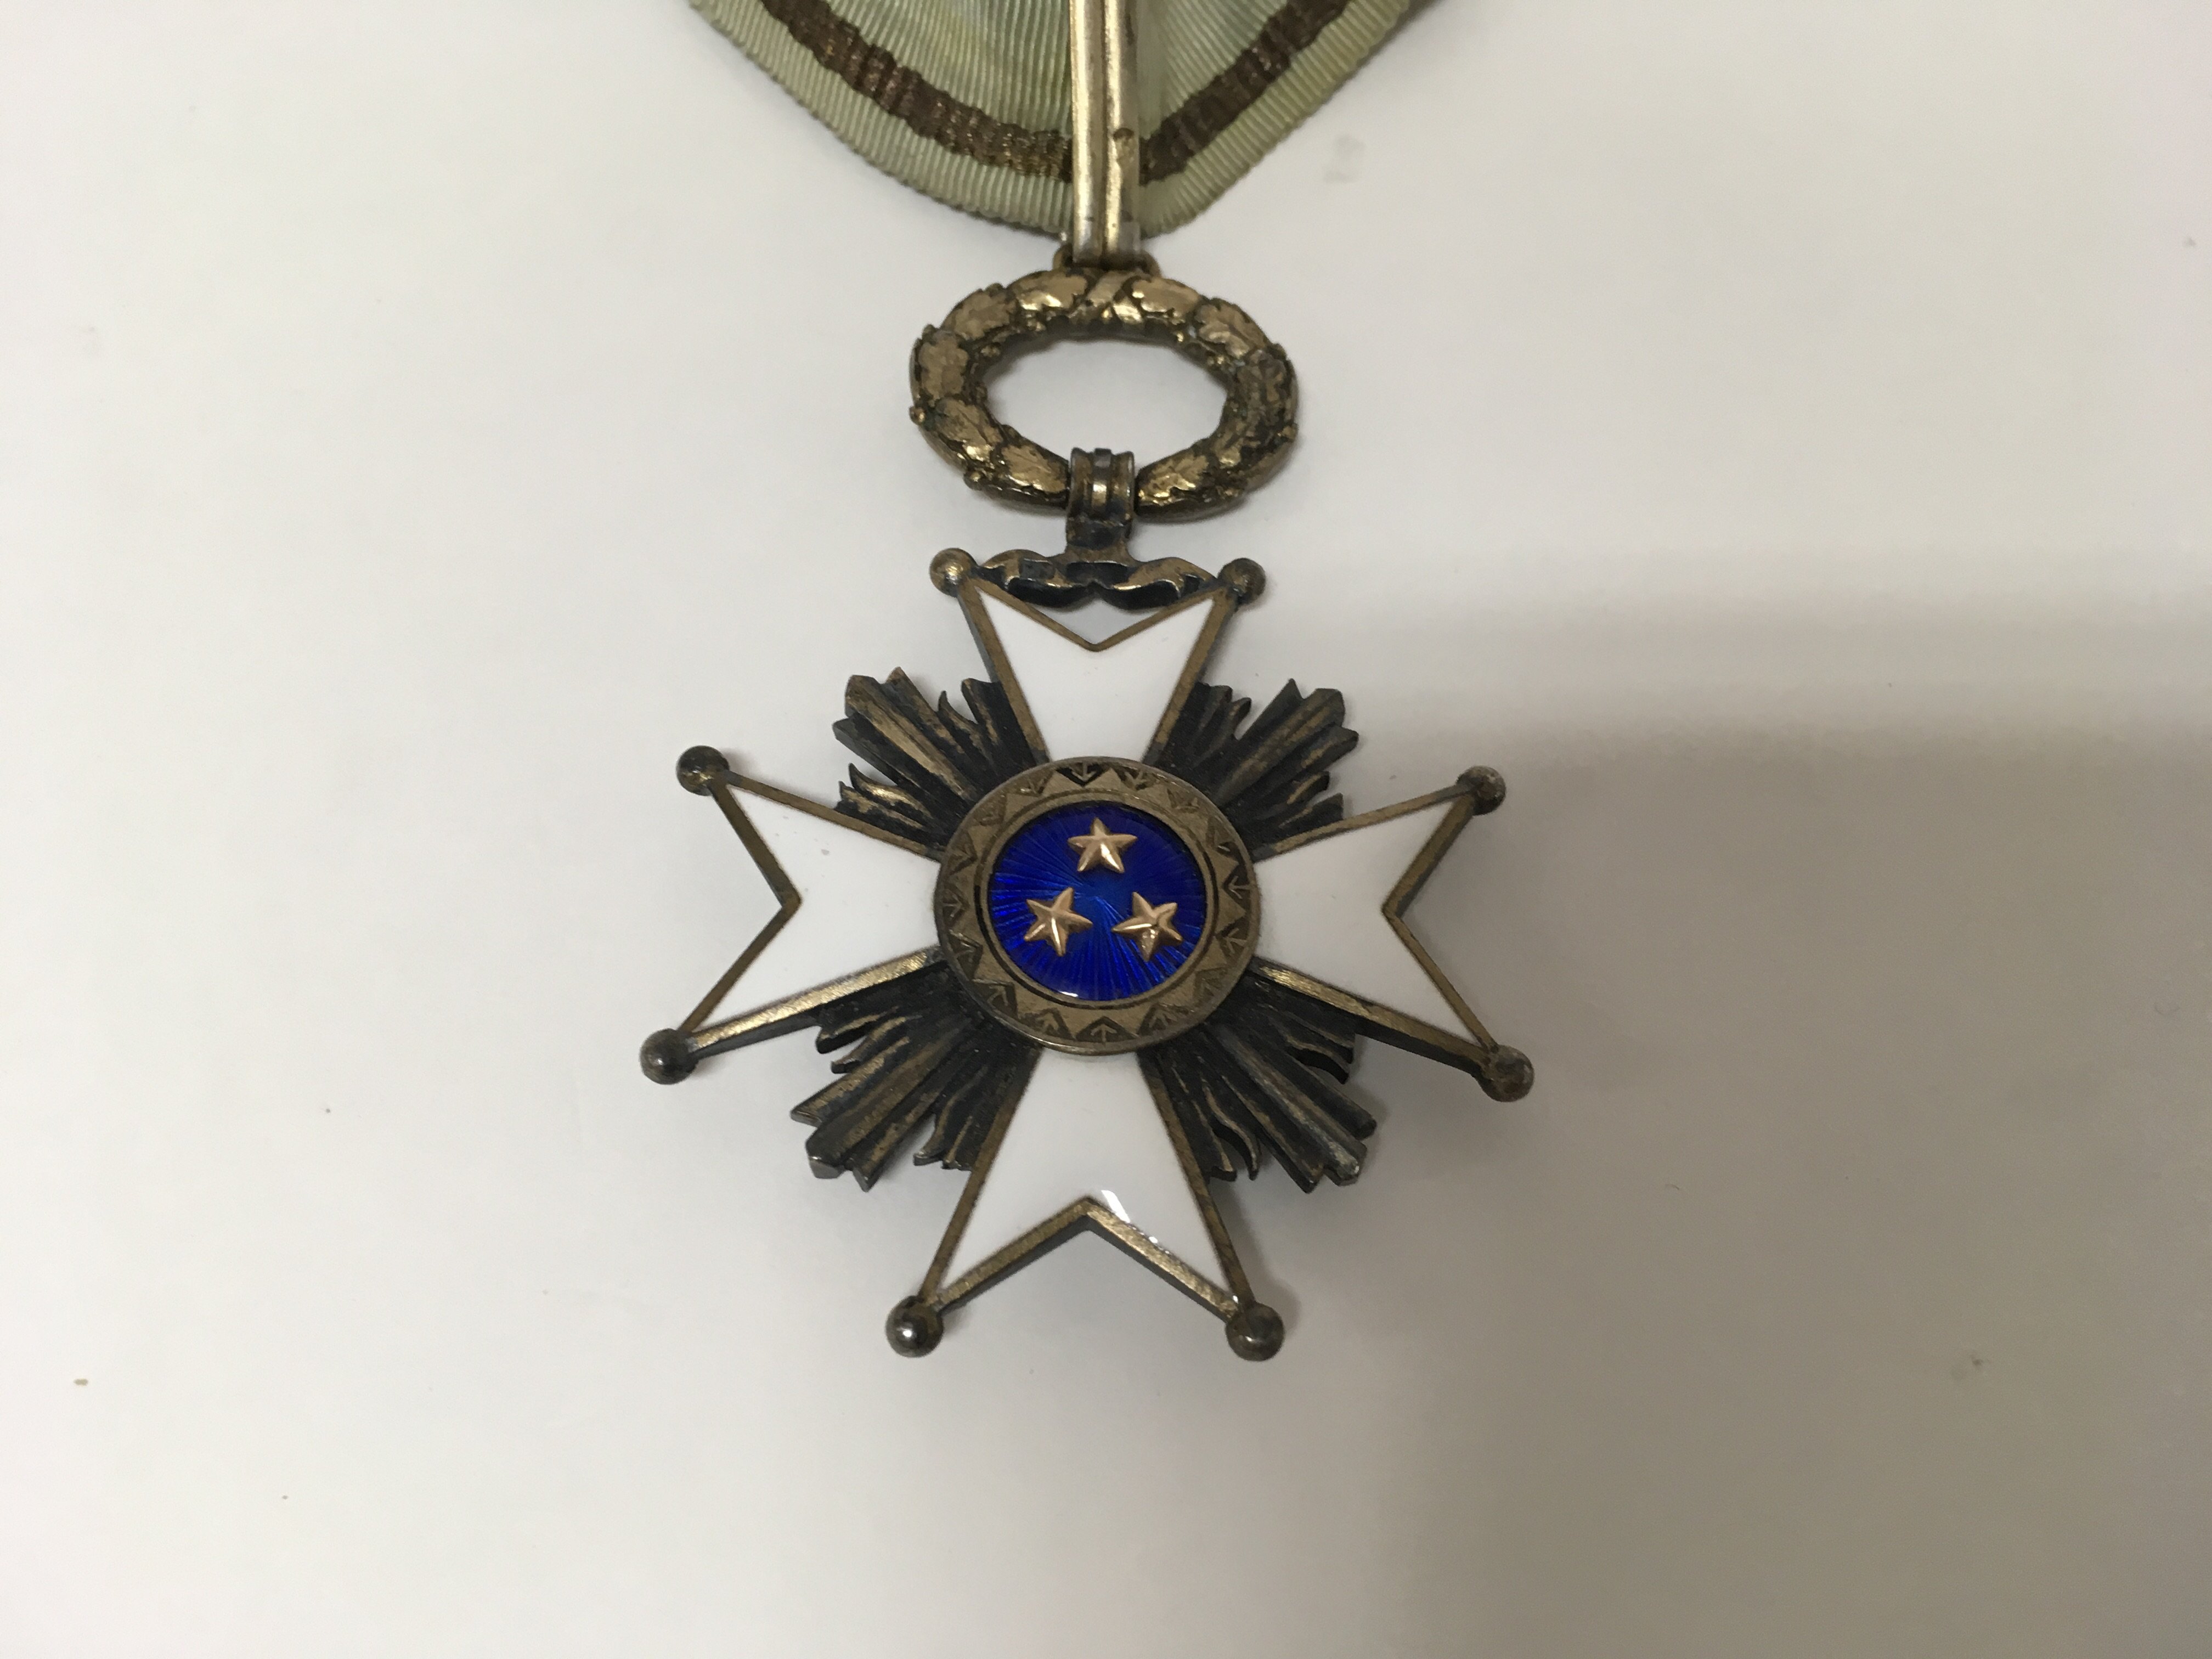 A 1918 WW1 Latvian order of the three stars medal